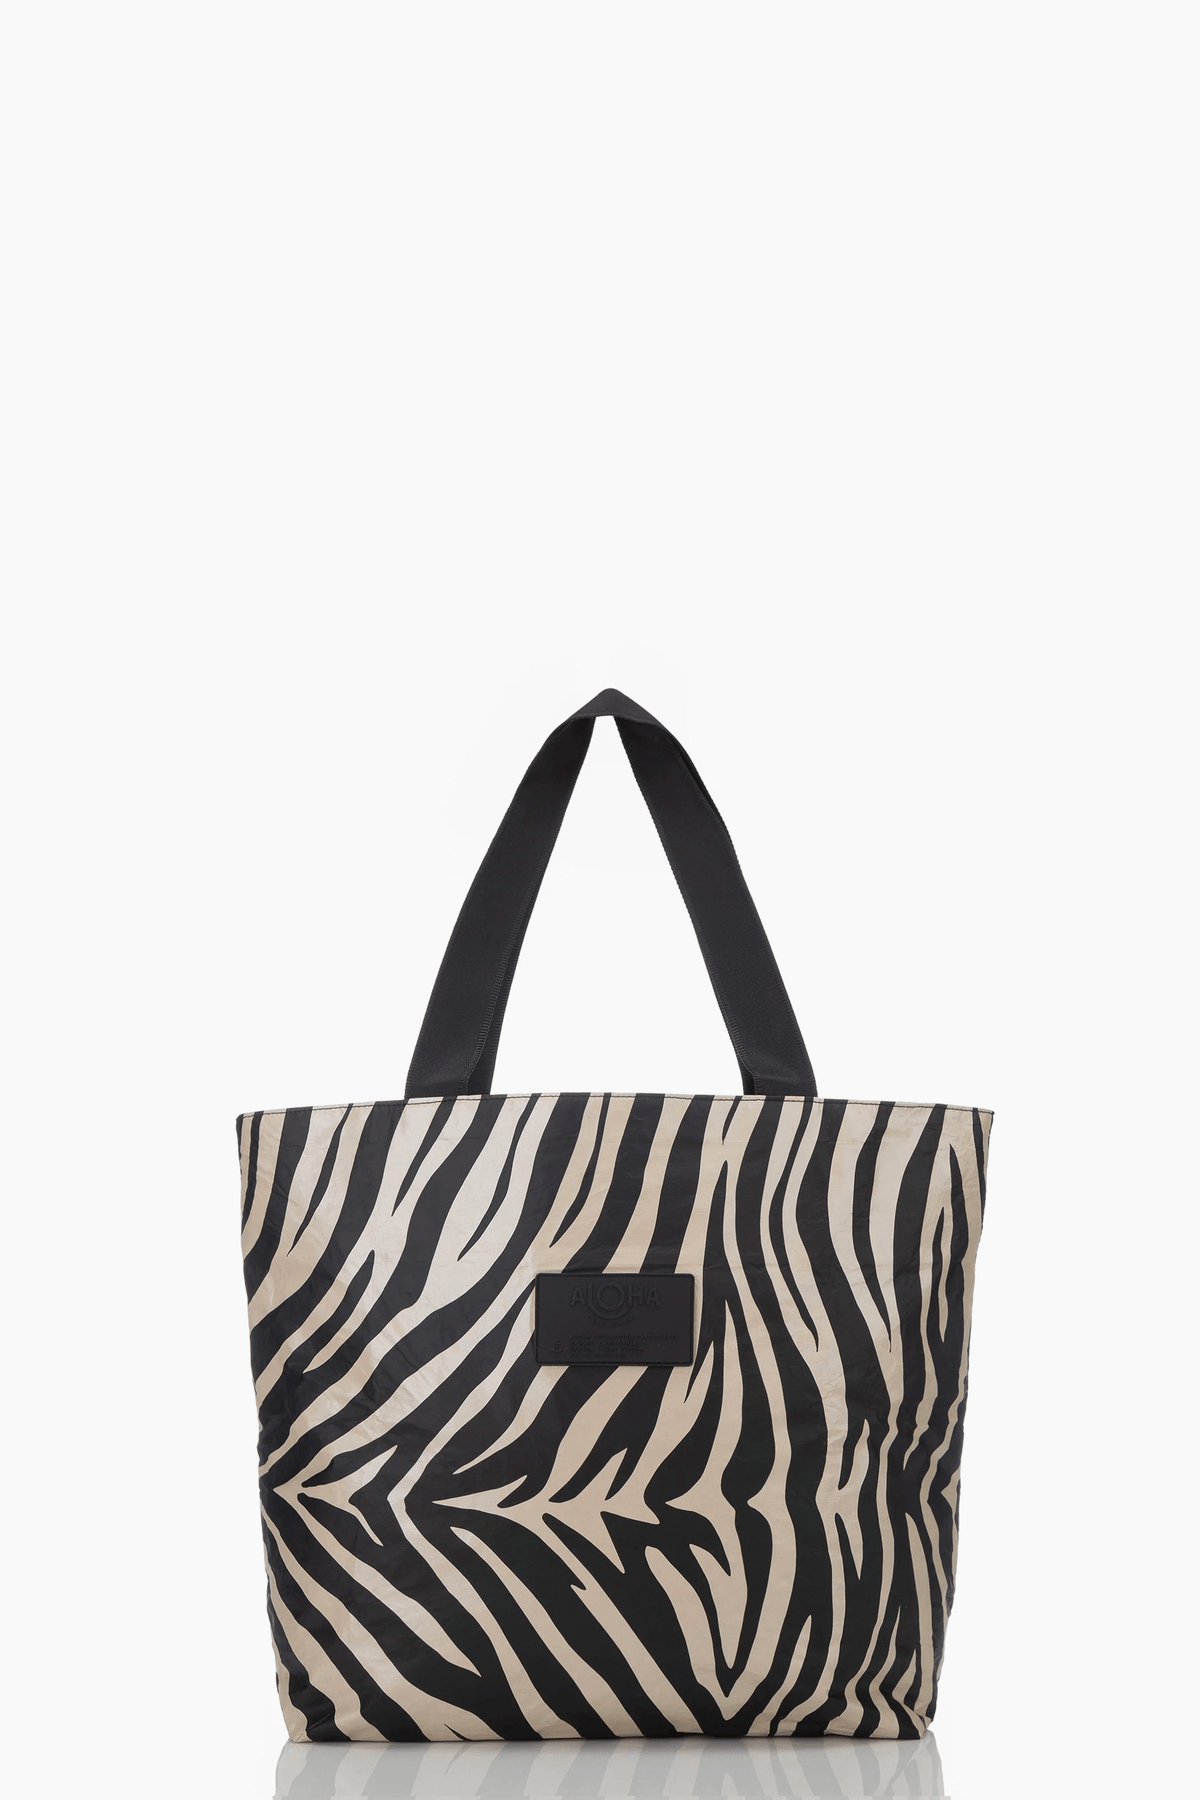 Aloha Eye of the Tiger Day Tripper Tote